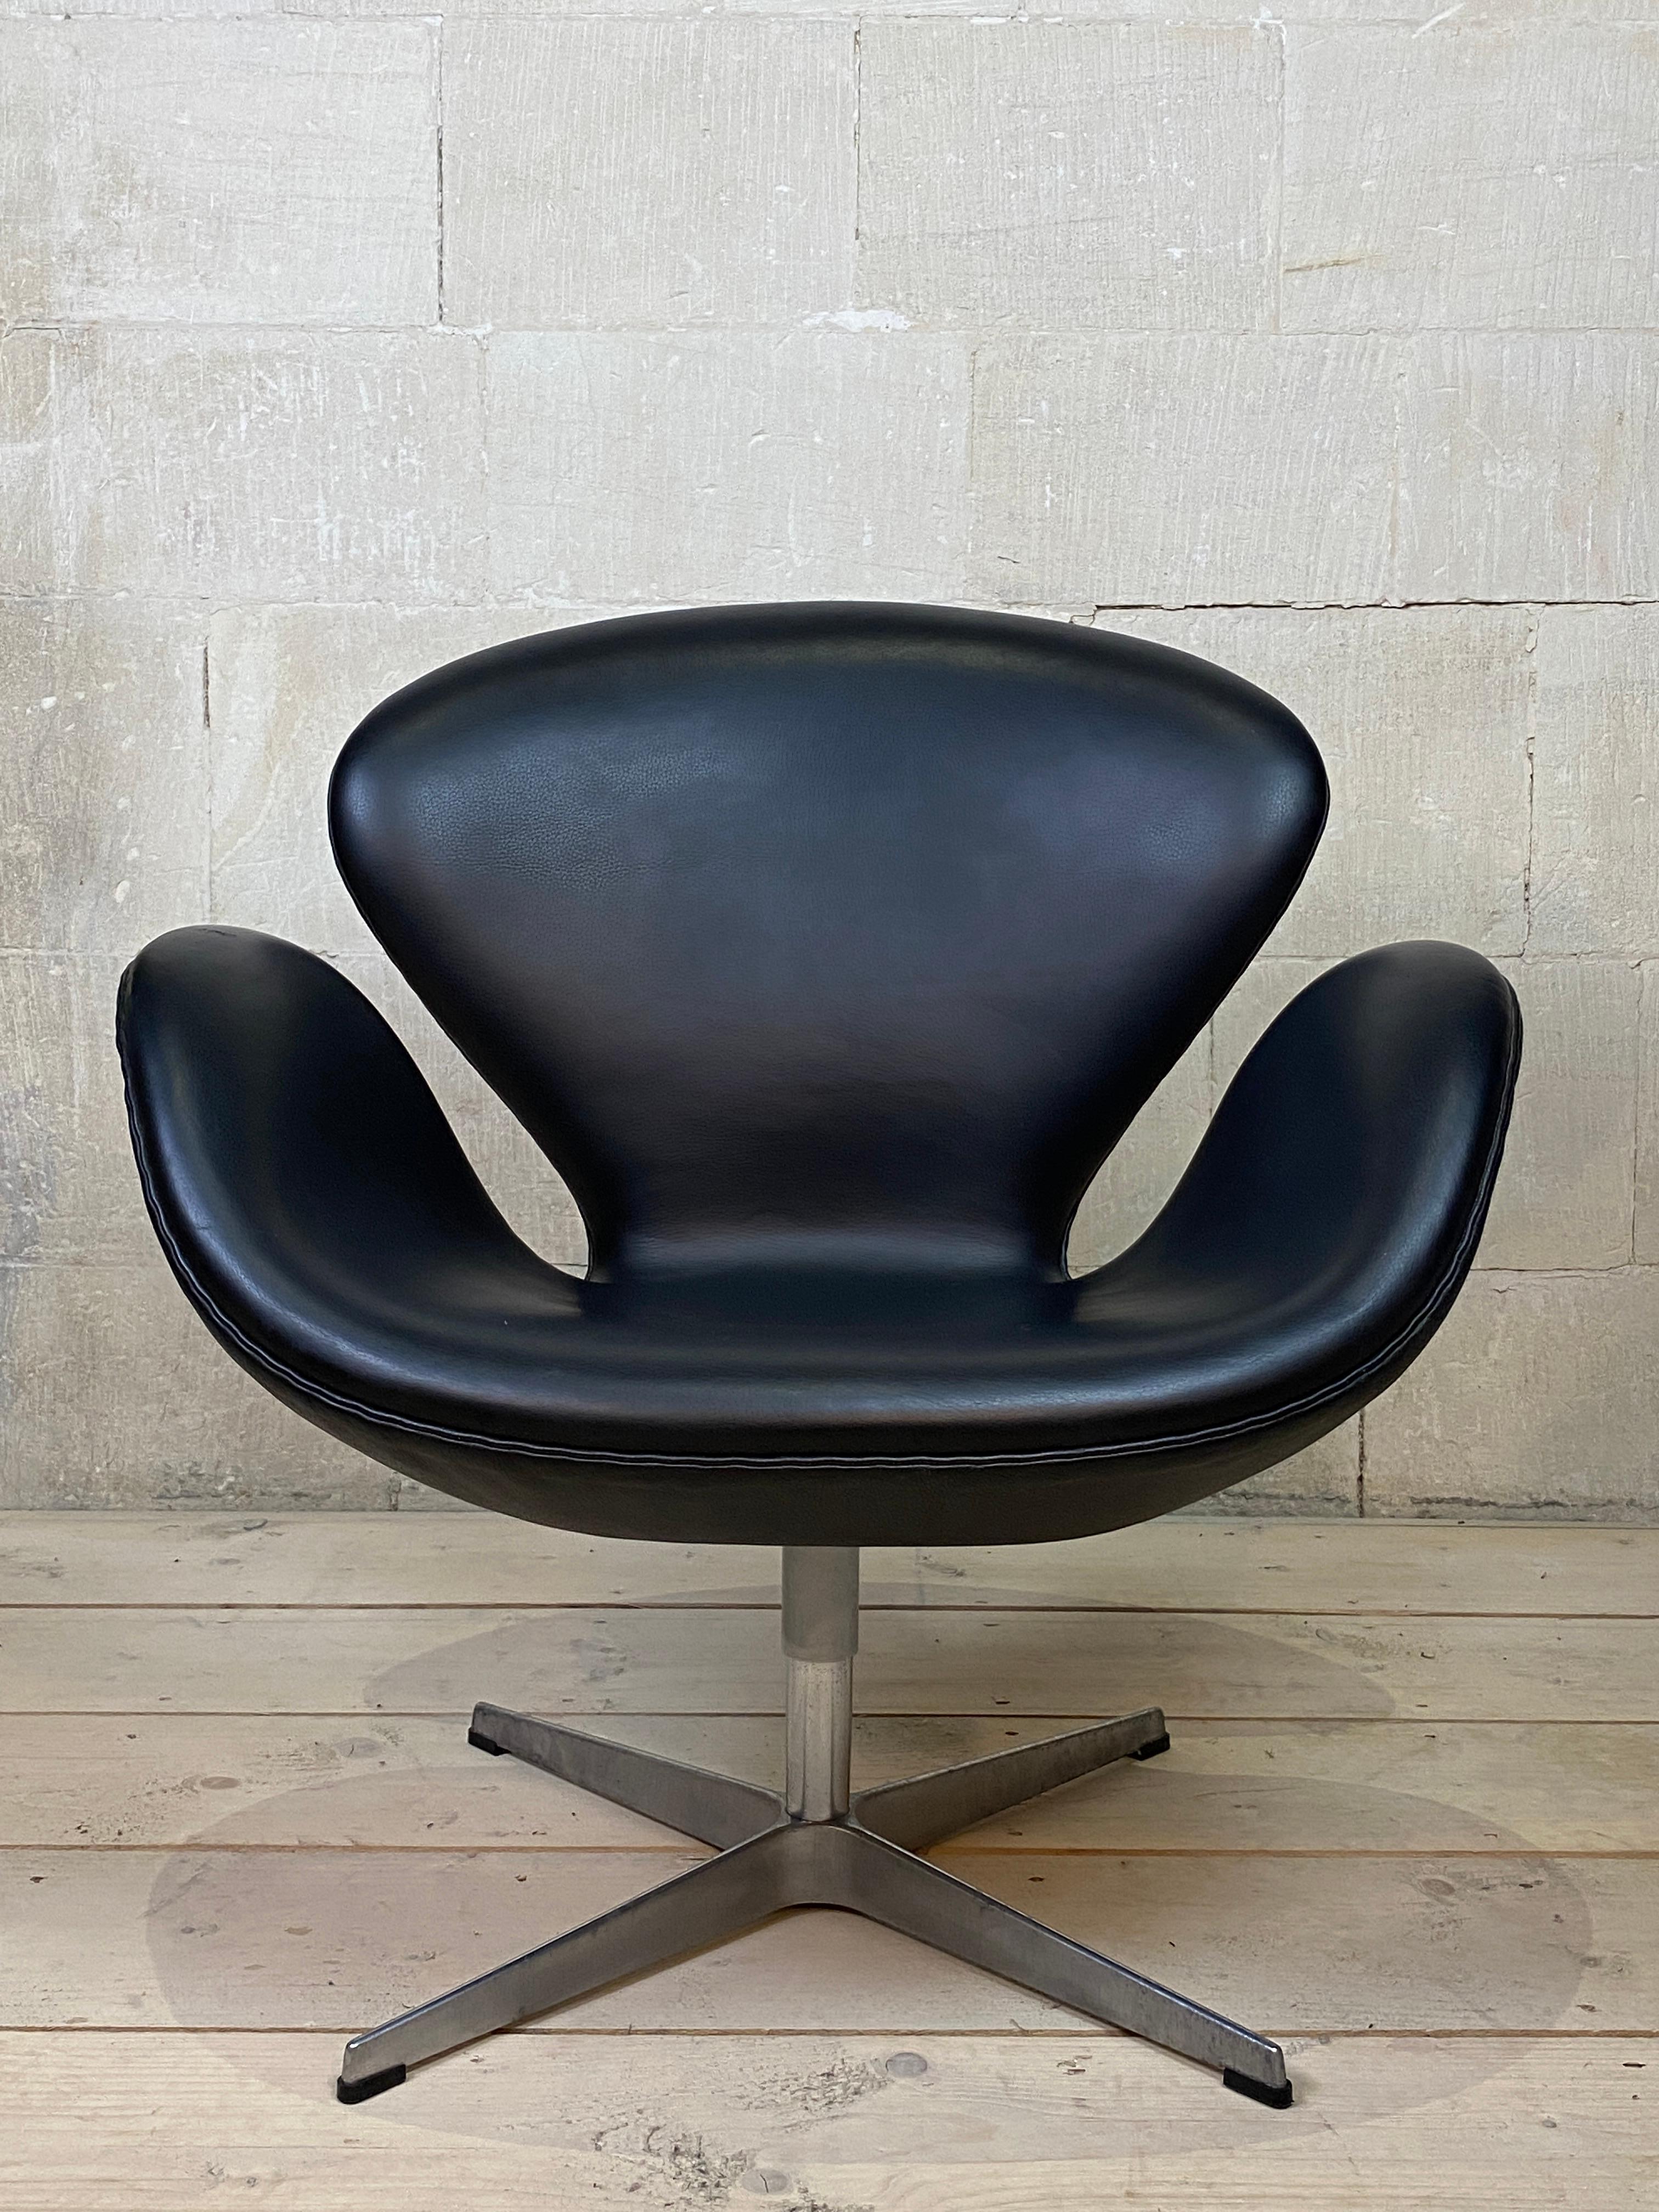 The beautiful Swan™ chair was designed by Arne Jacobsen in 1958 for the lobby and lounge areas of the SAS Royal Hotel in Copenhagen. The design contains no straight lines, making it look organic and soft despite its simplicity and strong